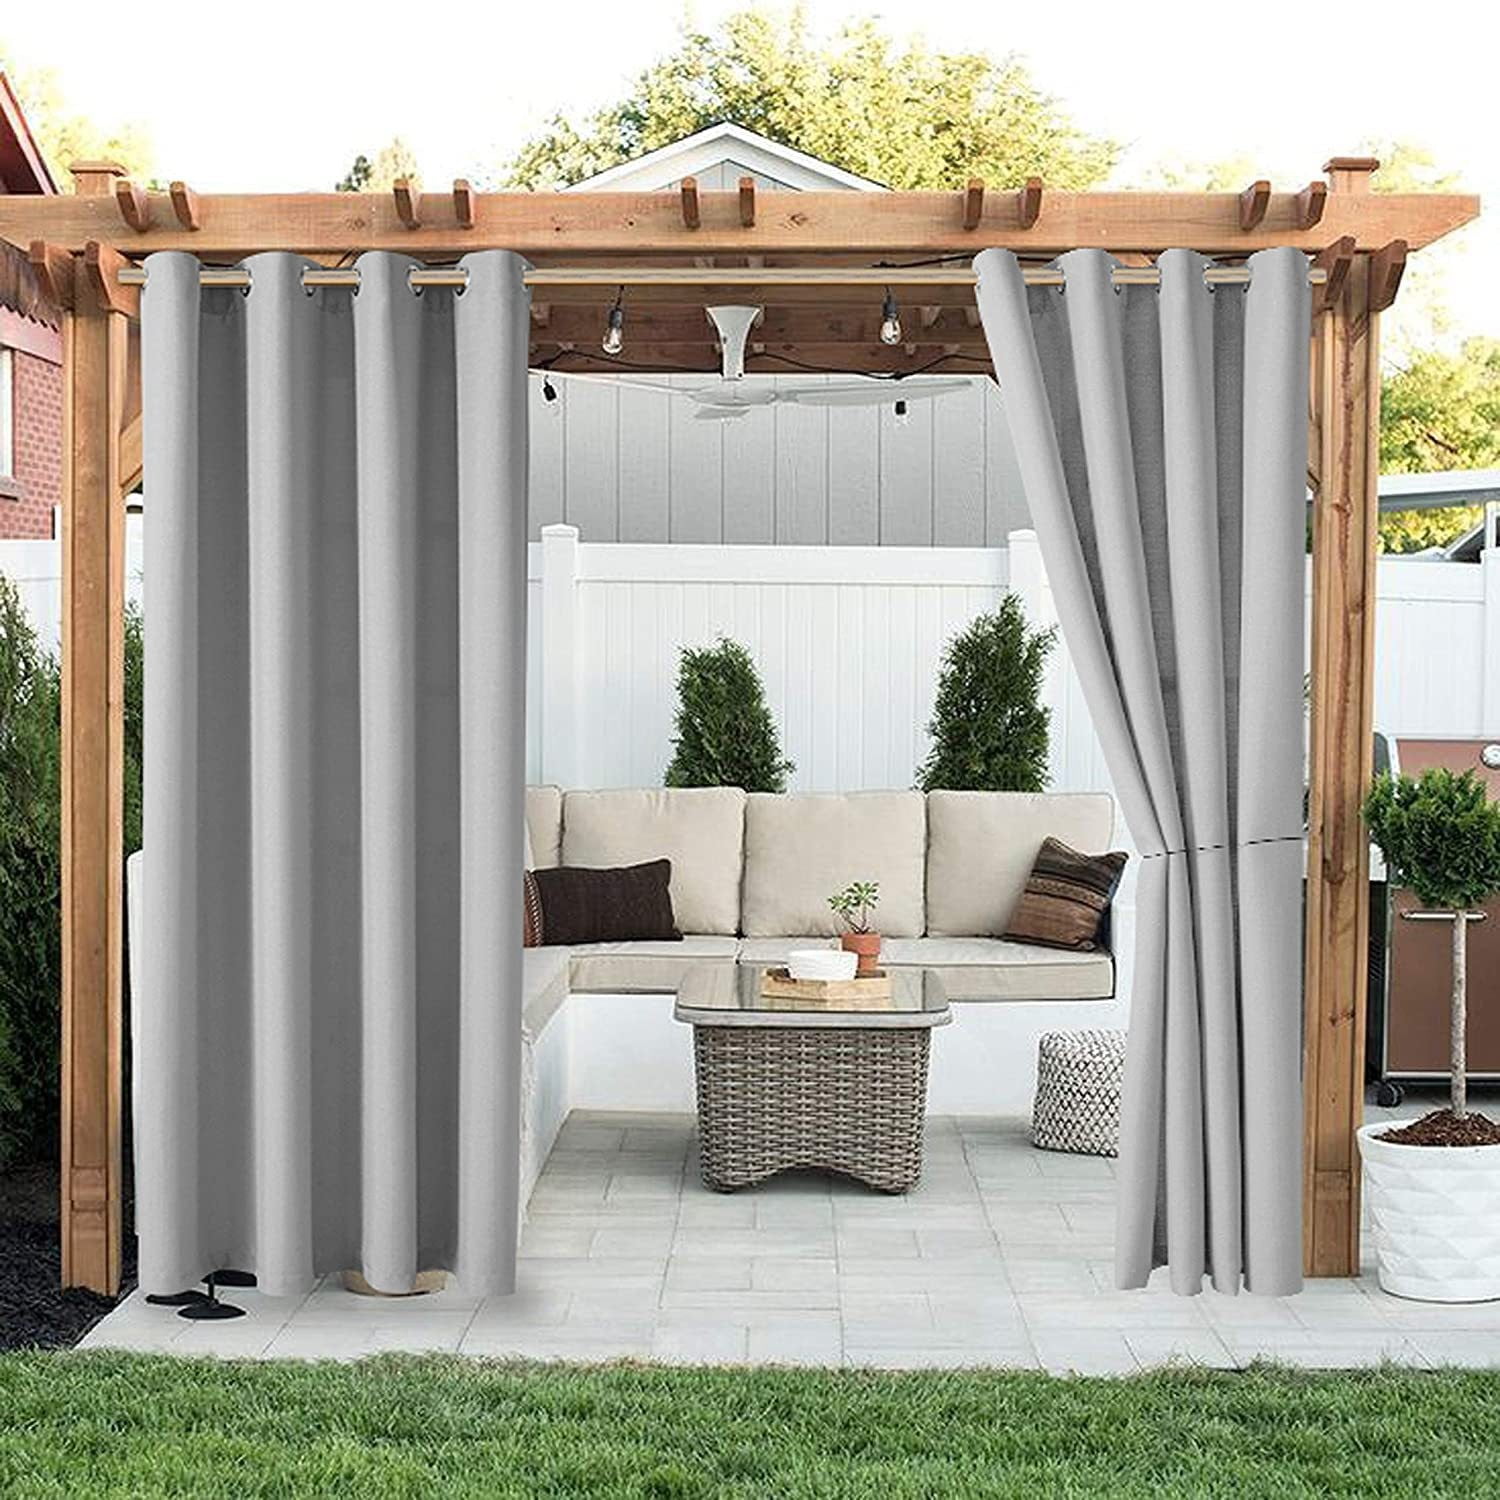 Shatex Home Cal W50xL84-Inch Outdoor Curtain Panels Patio Privacy Screen,SkyBlue 